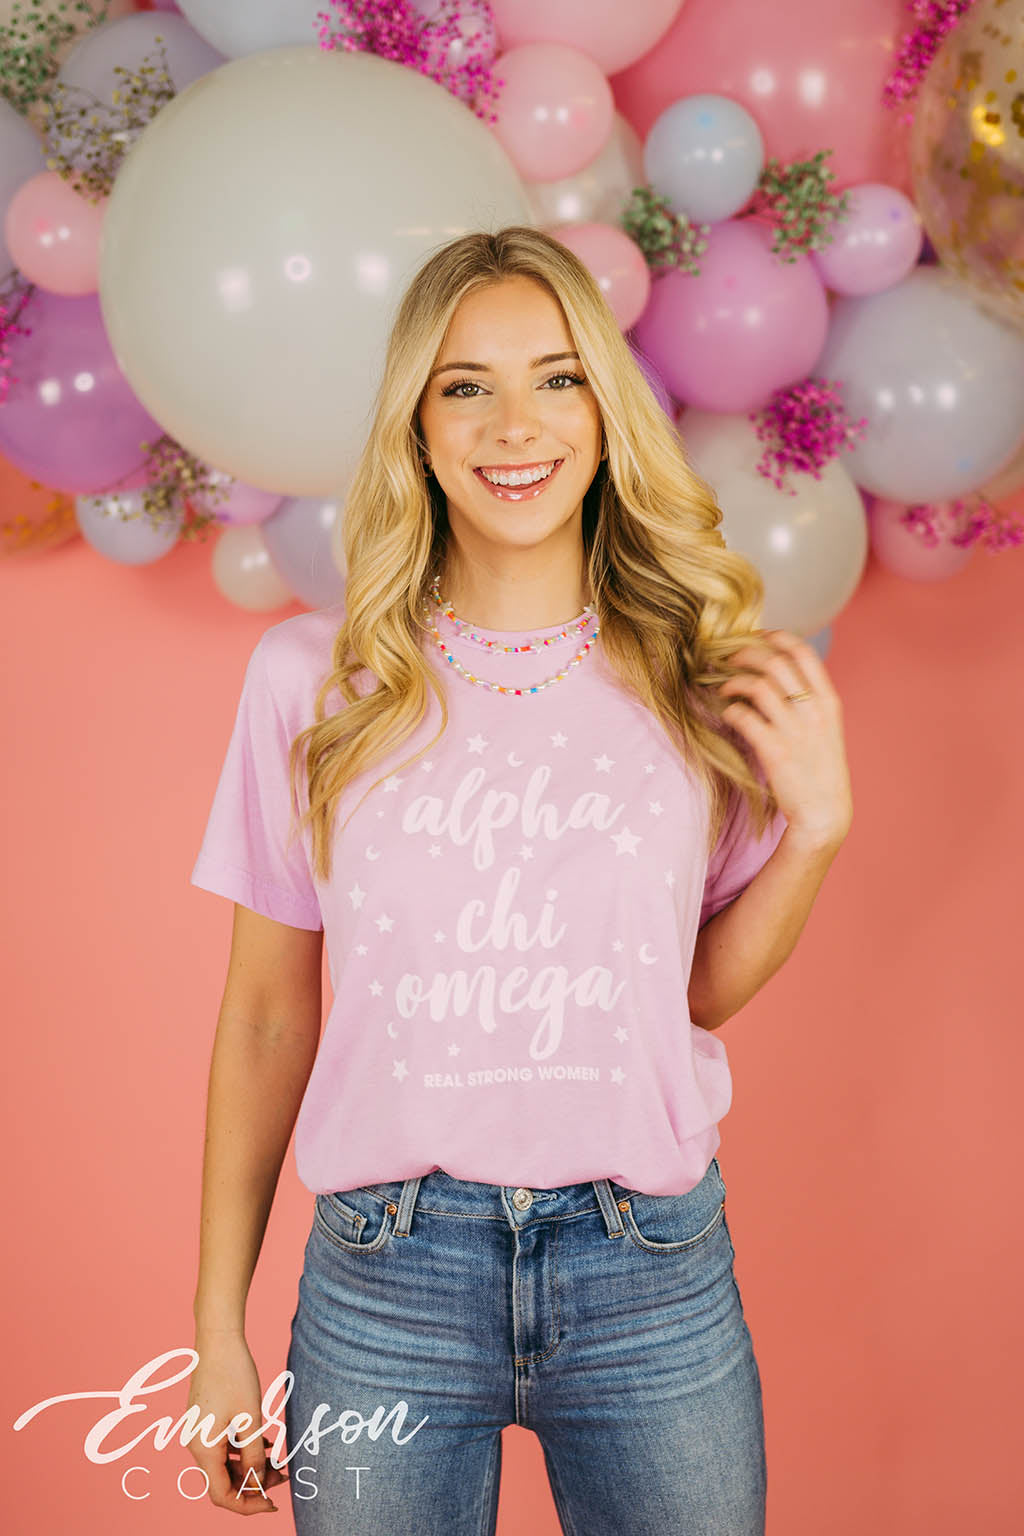 Alpha Chi Omega Lilac Real Strong Women Tee